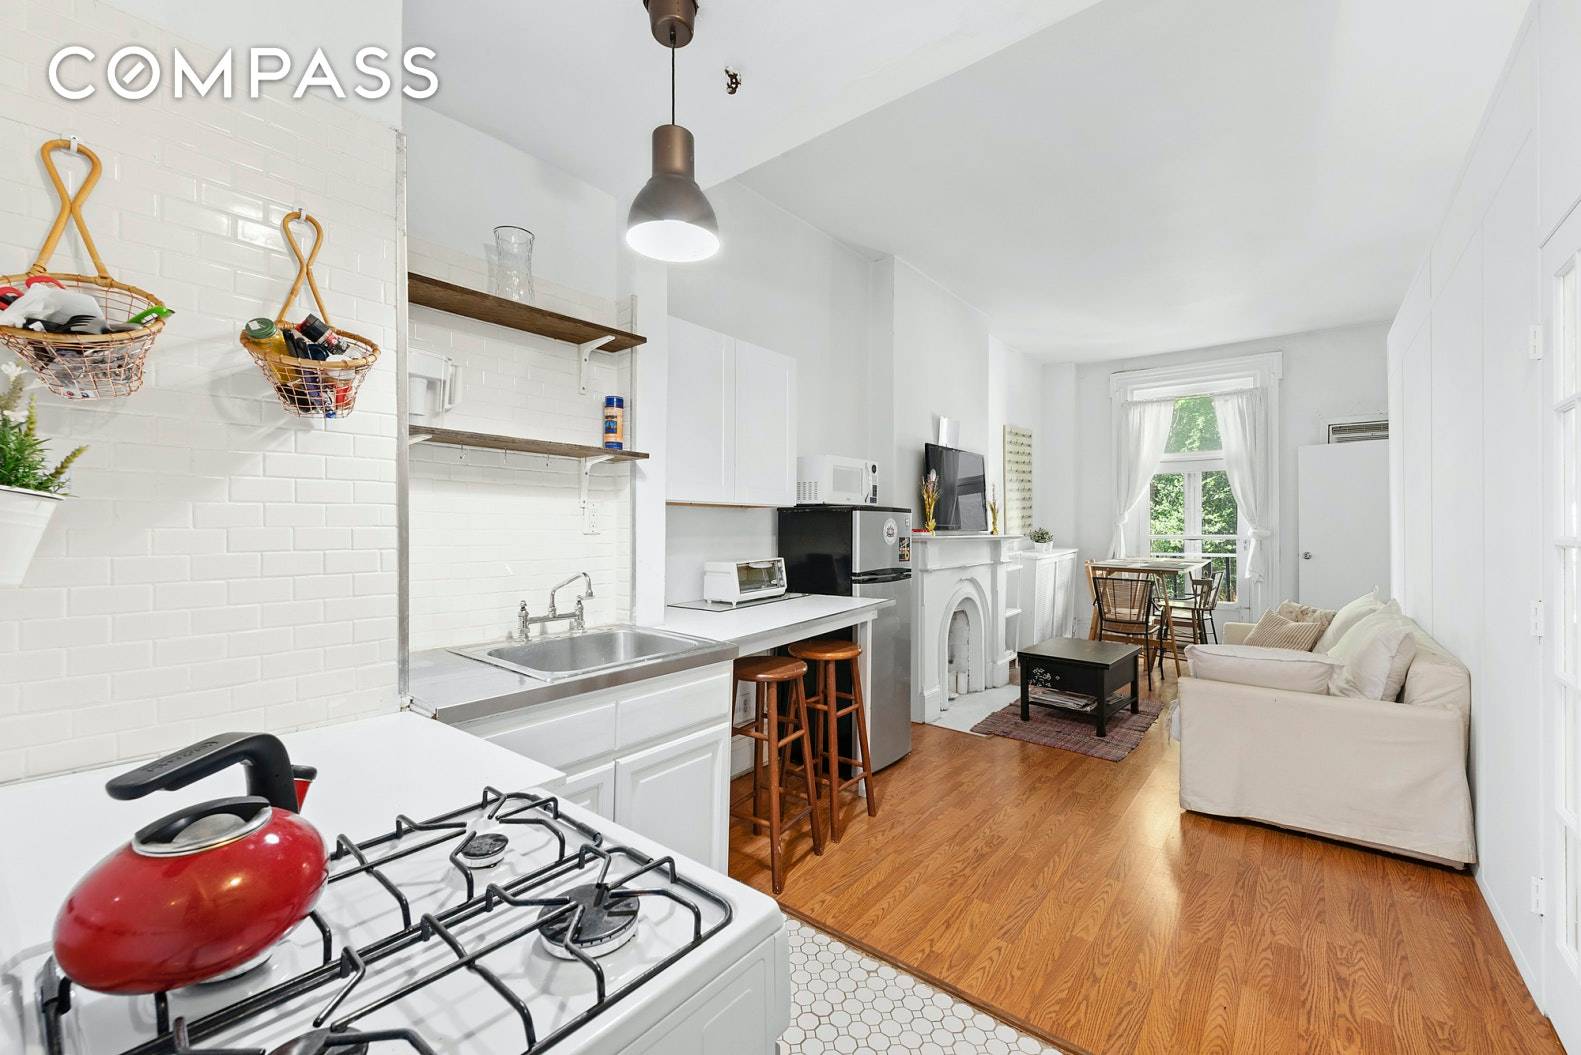 Conveniently situated in the heart of Kips Bay are these very bright 4 bedroom, 1 bath apartments located in a beautiful walk up building.